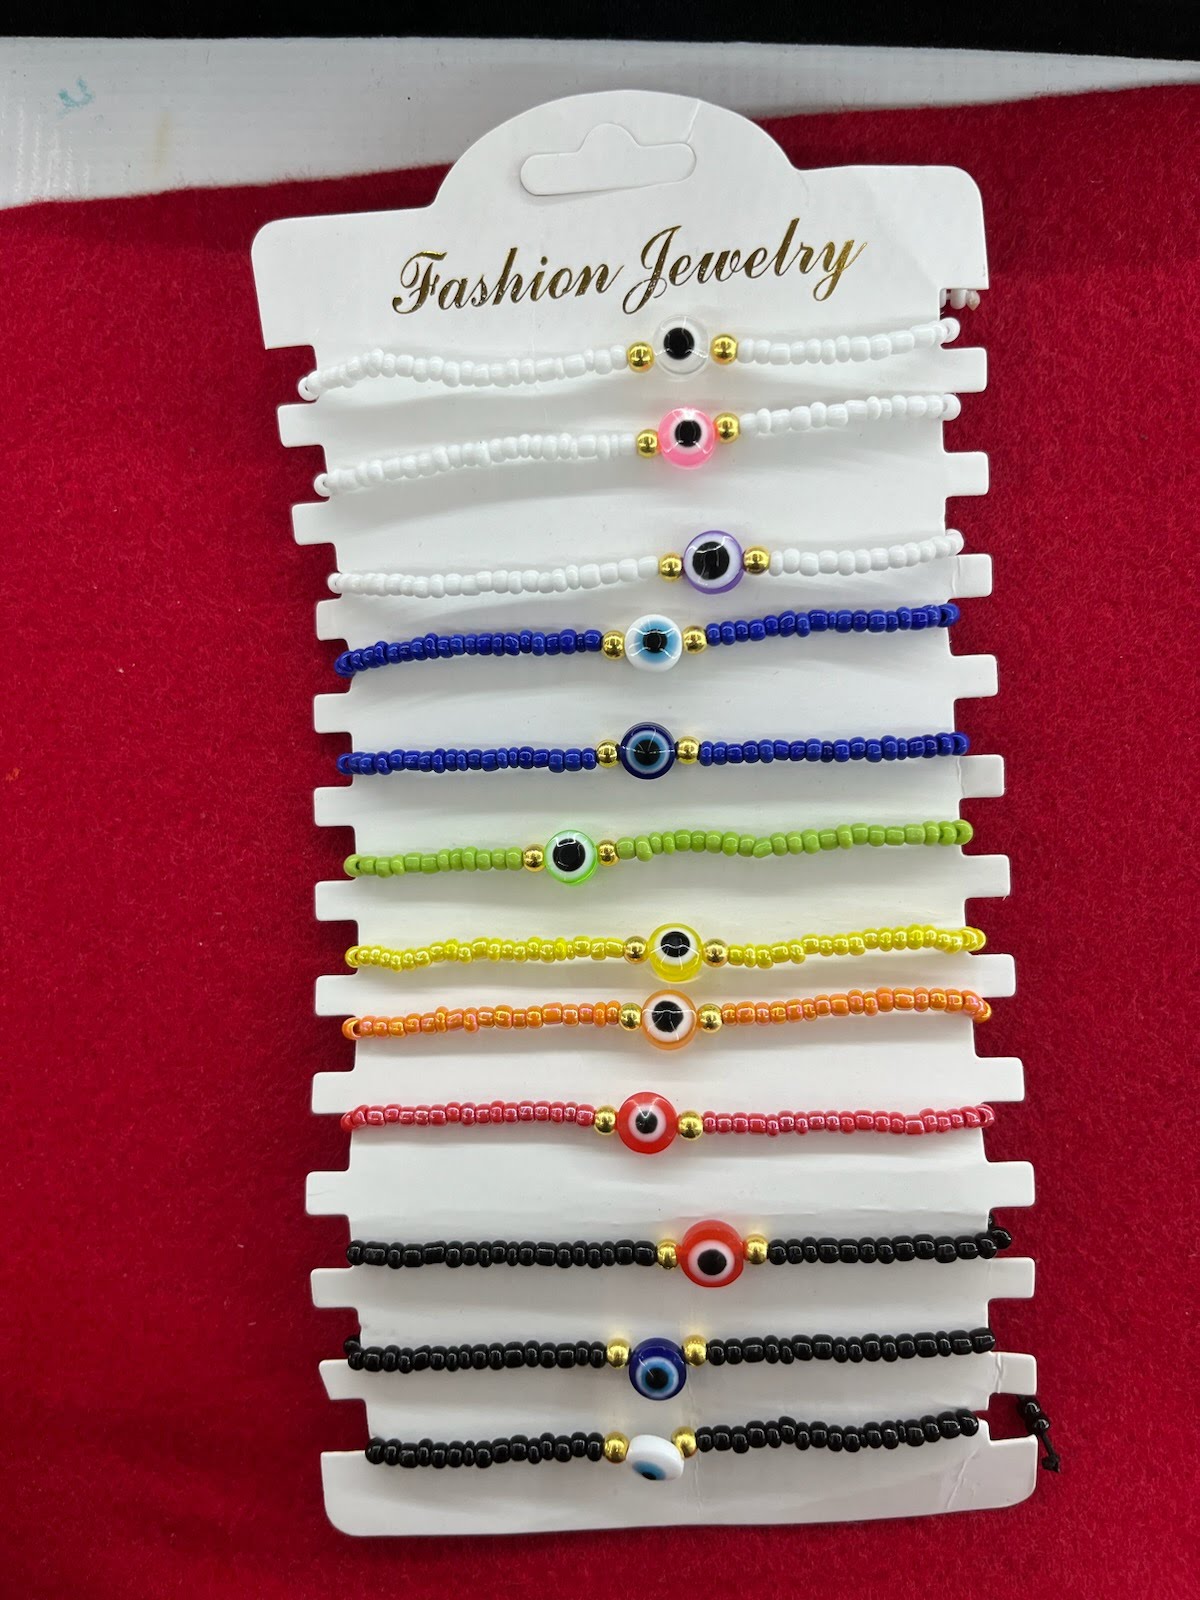 A display of different colors and sizes of bracelets.